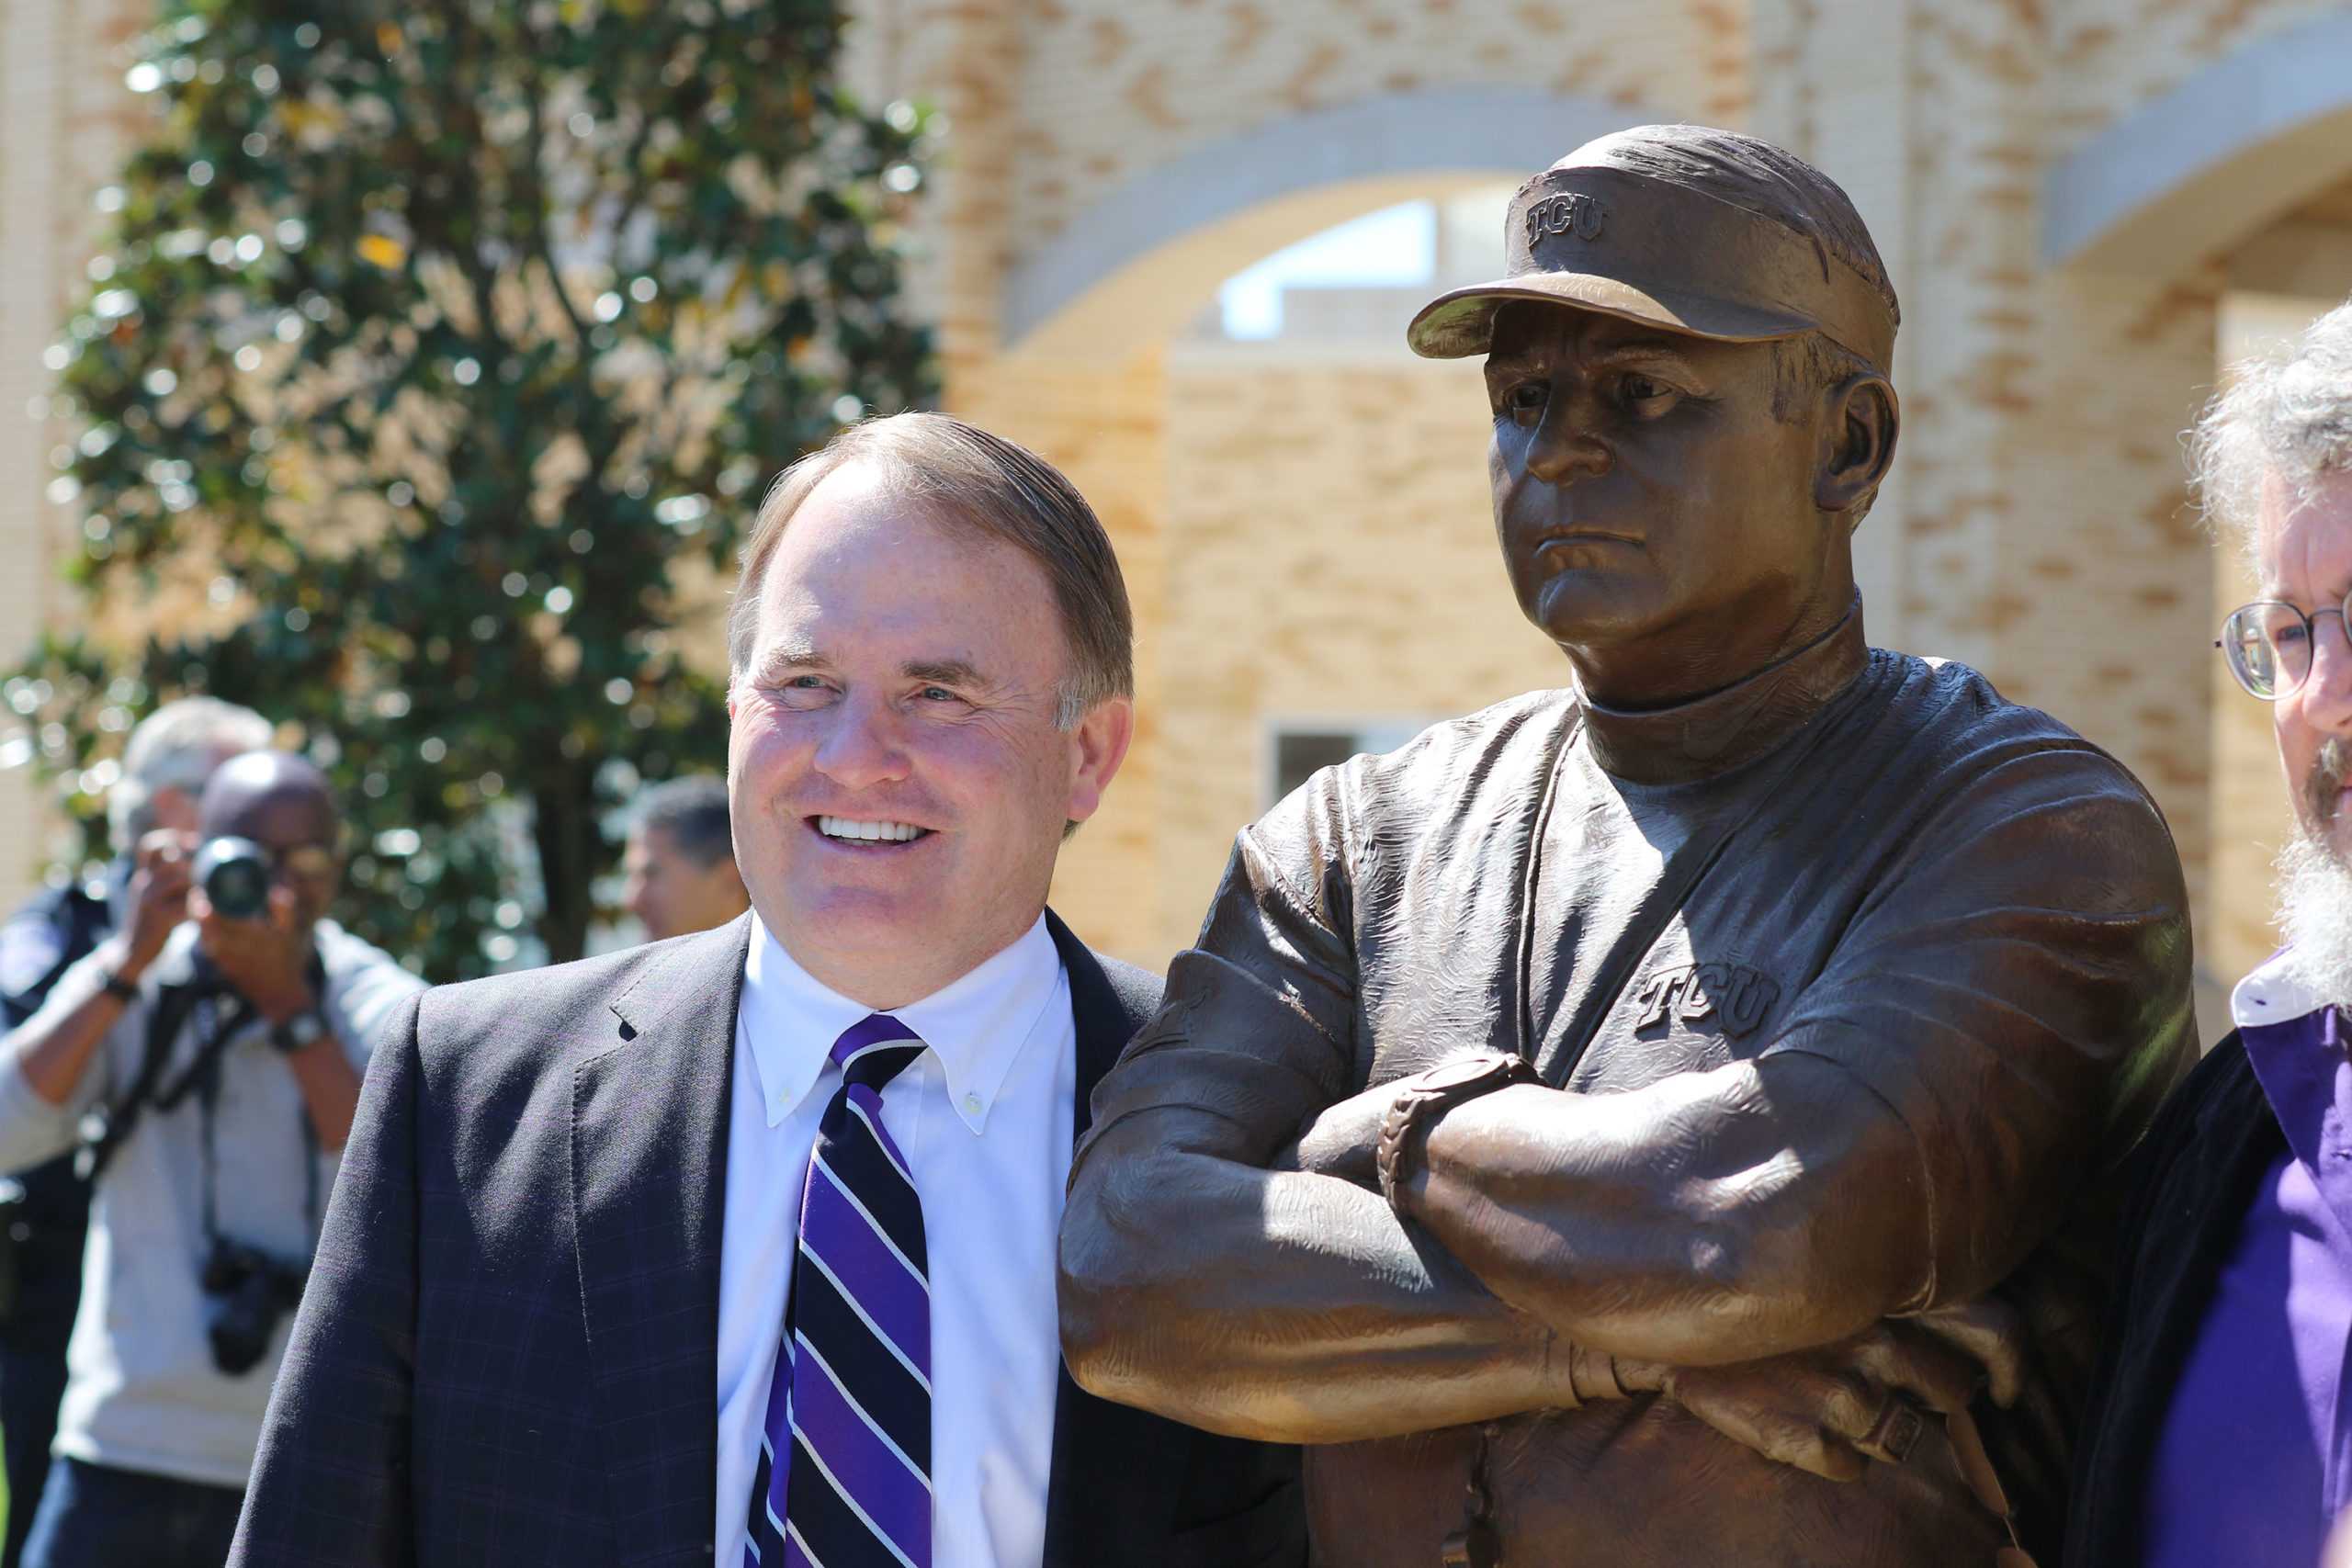 The+life+sized+statues+showcase+how+far+TCU+has+come+in+college+football.